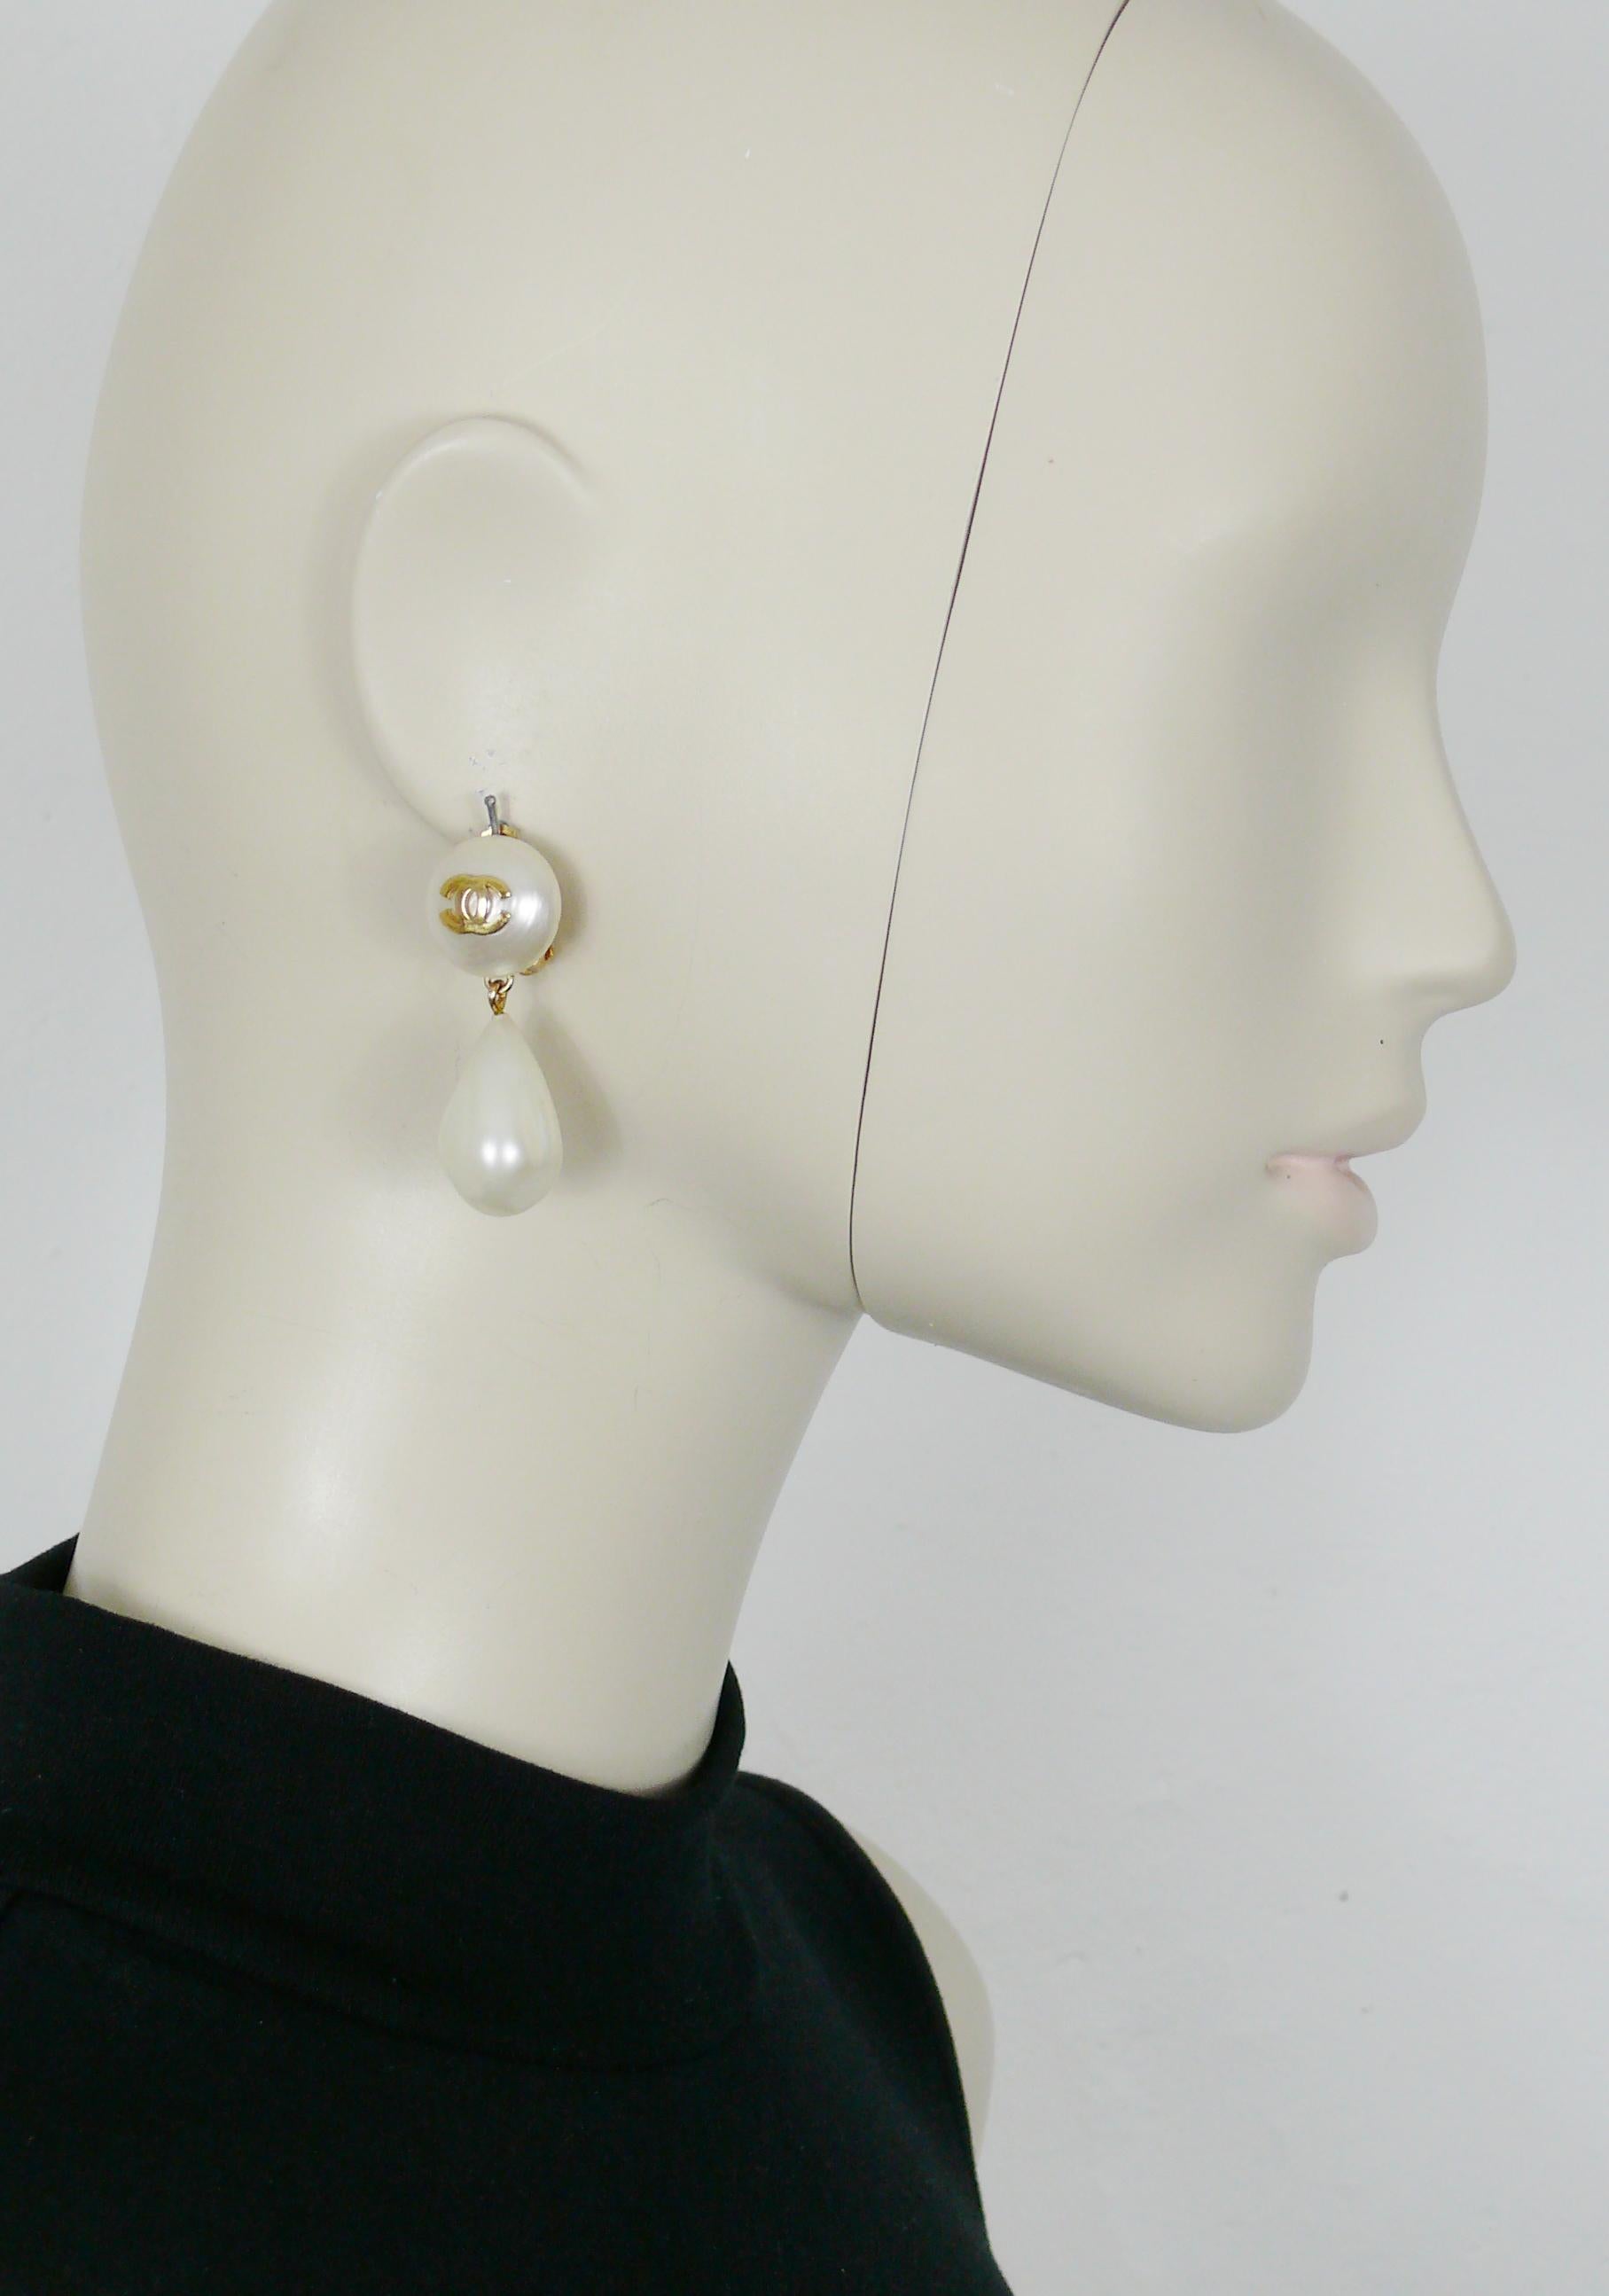 CHANEL vintage faux pearl dangling earrings (clip-on) featuring a gold toned CC logo and a Baroque irregular-shaped glass faux pearl drop.

Embossed CHANEL.

Indicative measurements : height approx. 4.3 cm (1.69 inches) / max. width approx. 1.6 cm